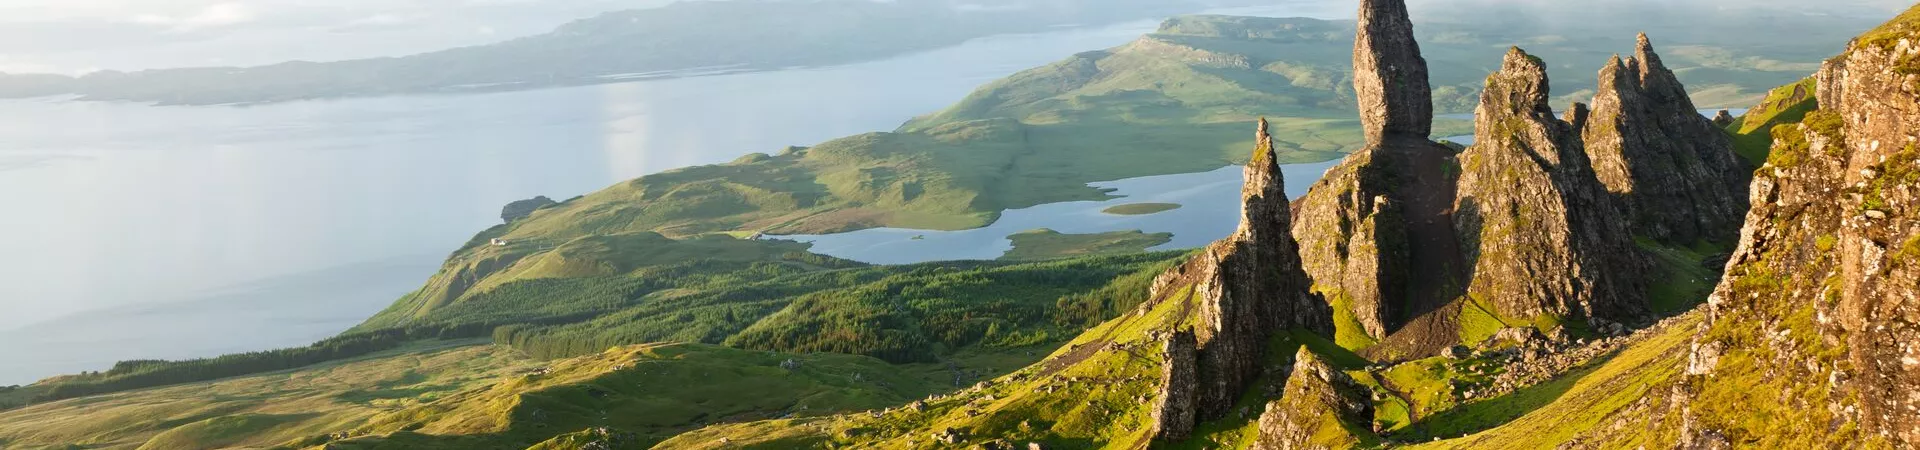 The Old Man of Storr in Scotland